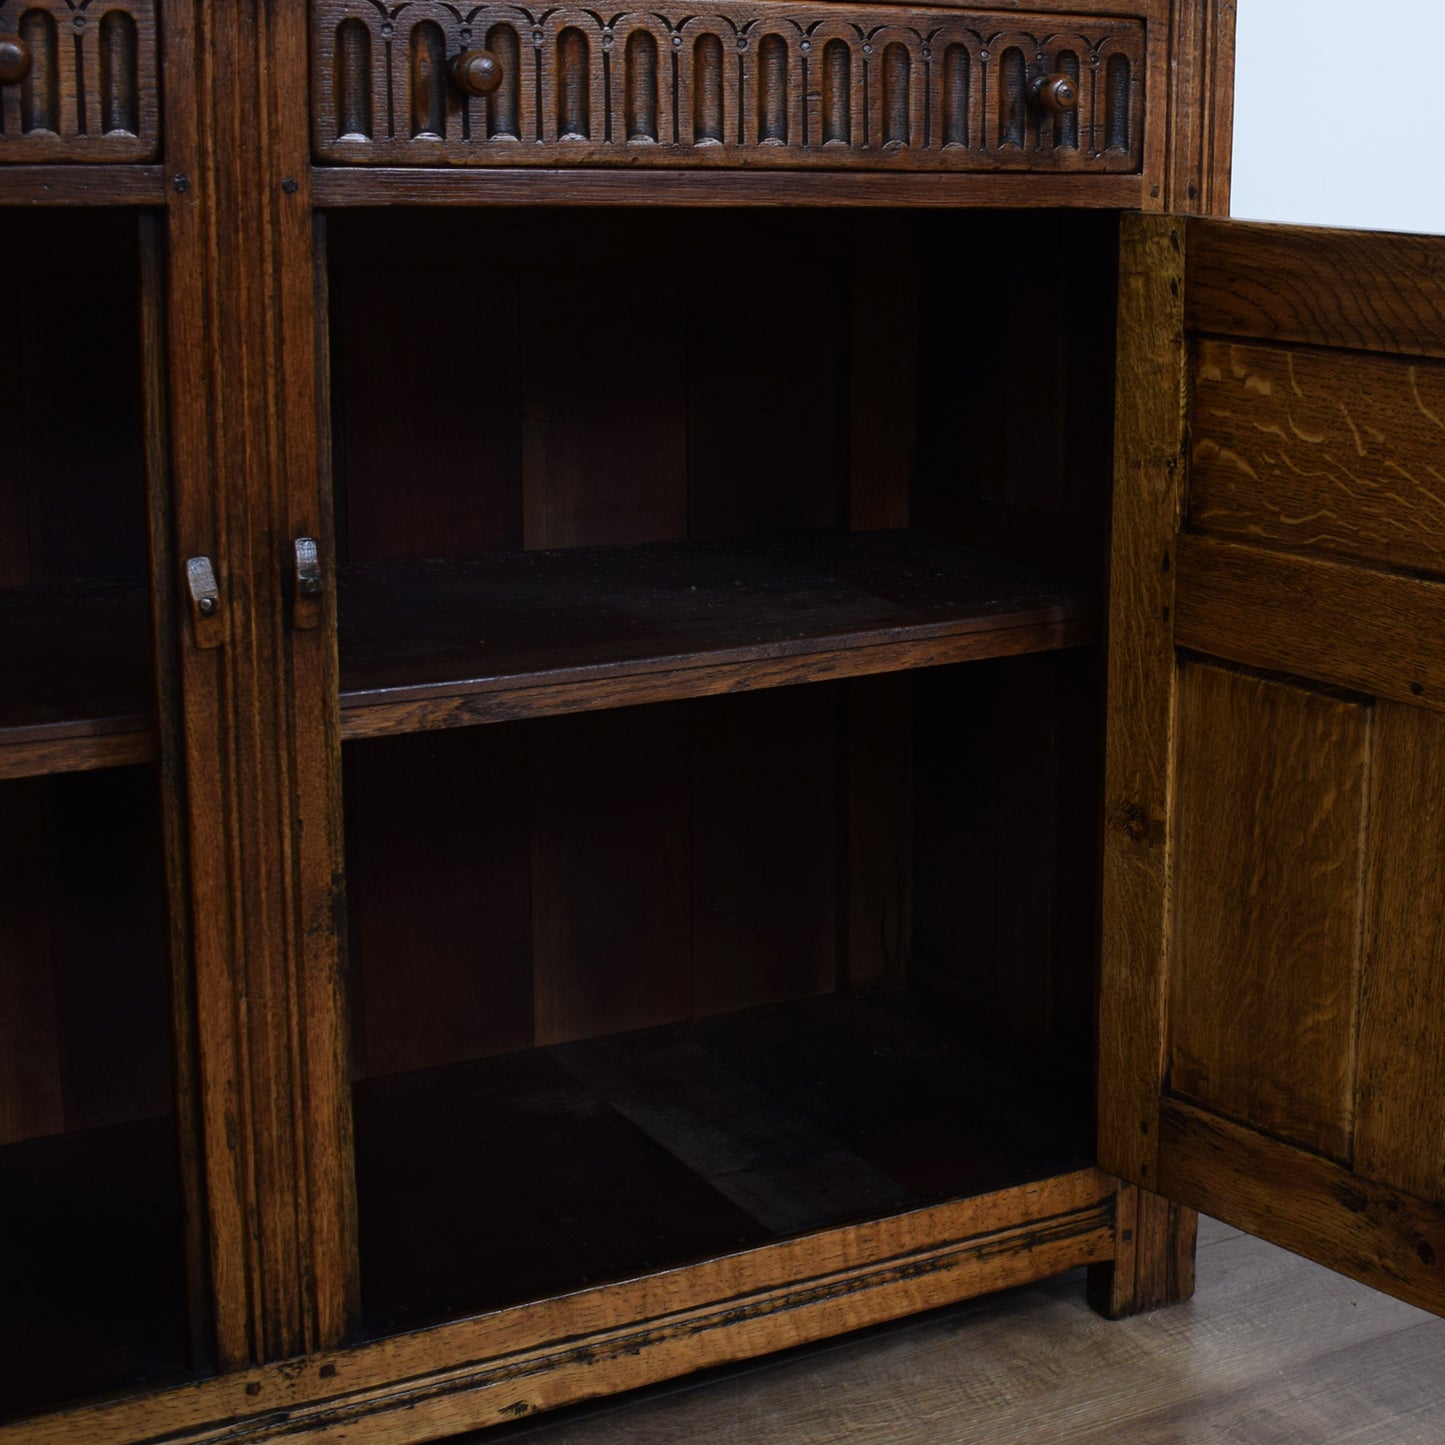 Carved Solid Oak Court Cupboard